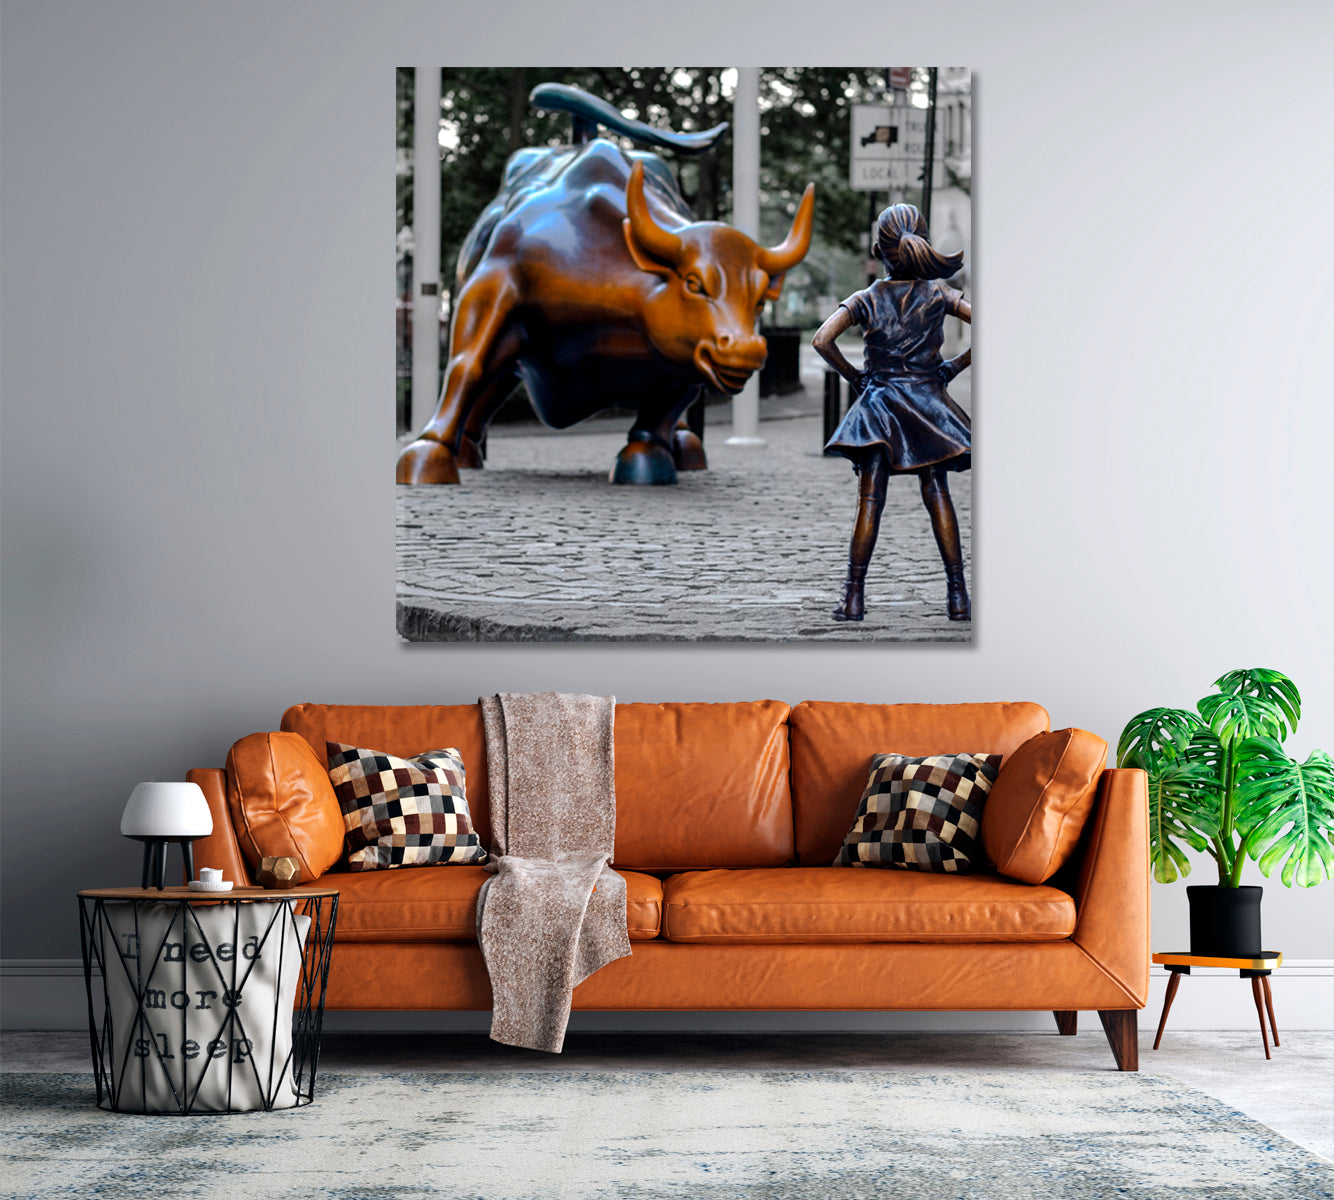 The Fearless Girl and Charging Bull New York City Manhattan NY USA - Square Panel Famous Landmarks Artwork Print Artesty   